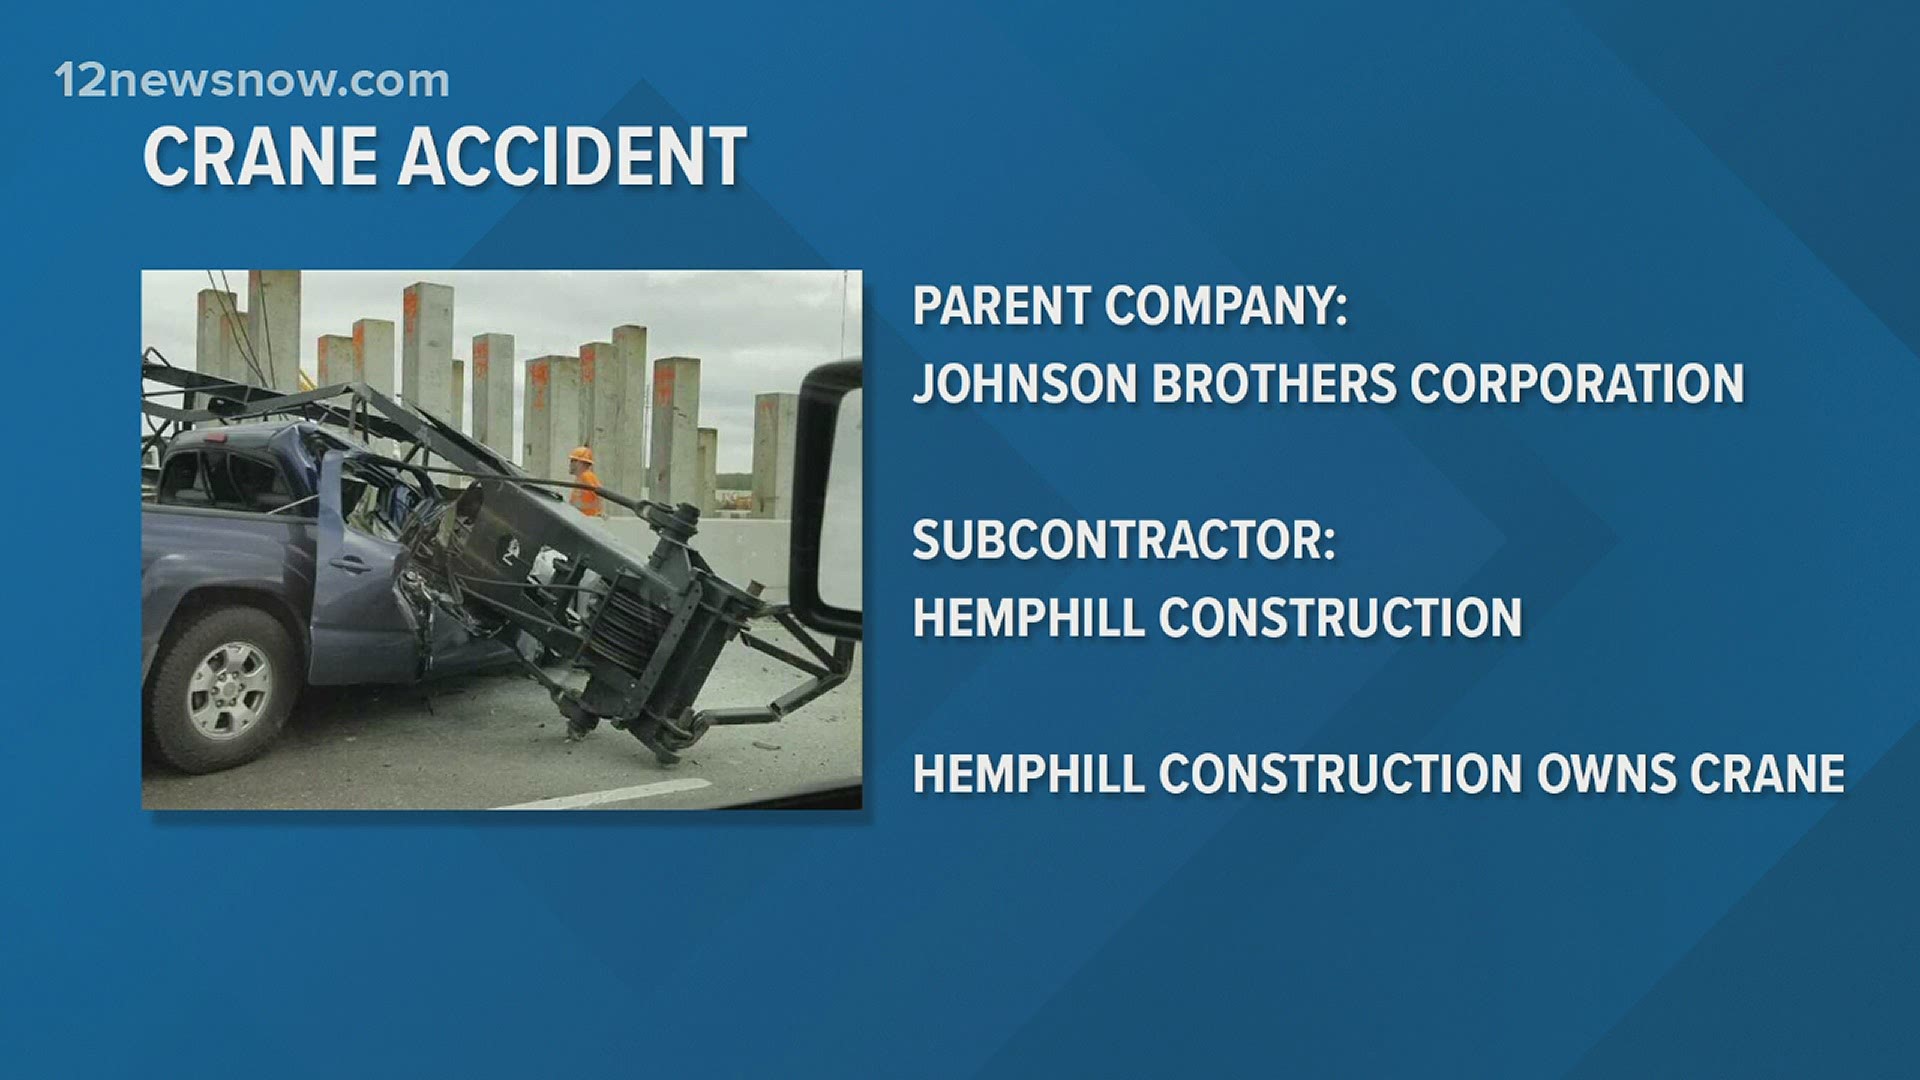 State agencies have released statements regarding construction at the site of the deadly accident.